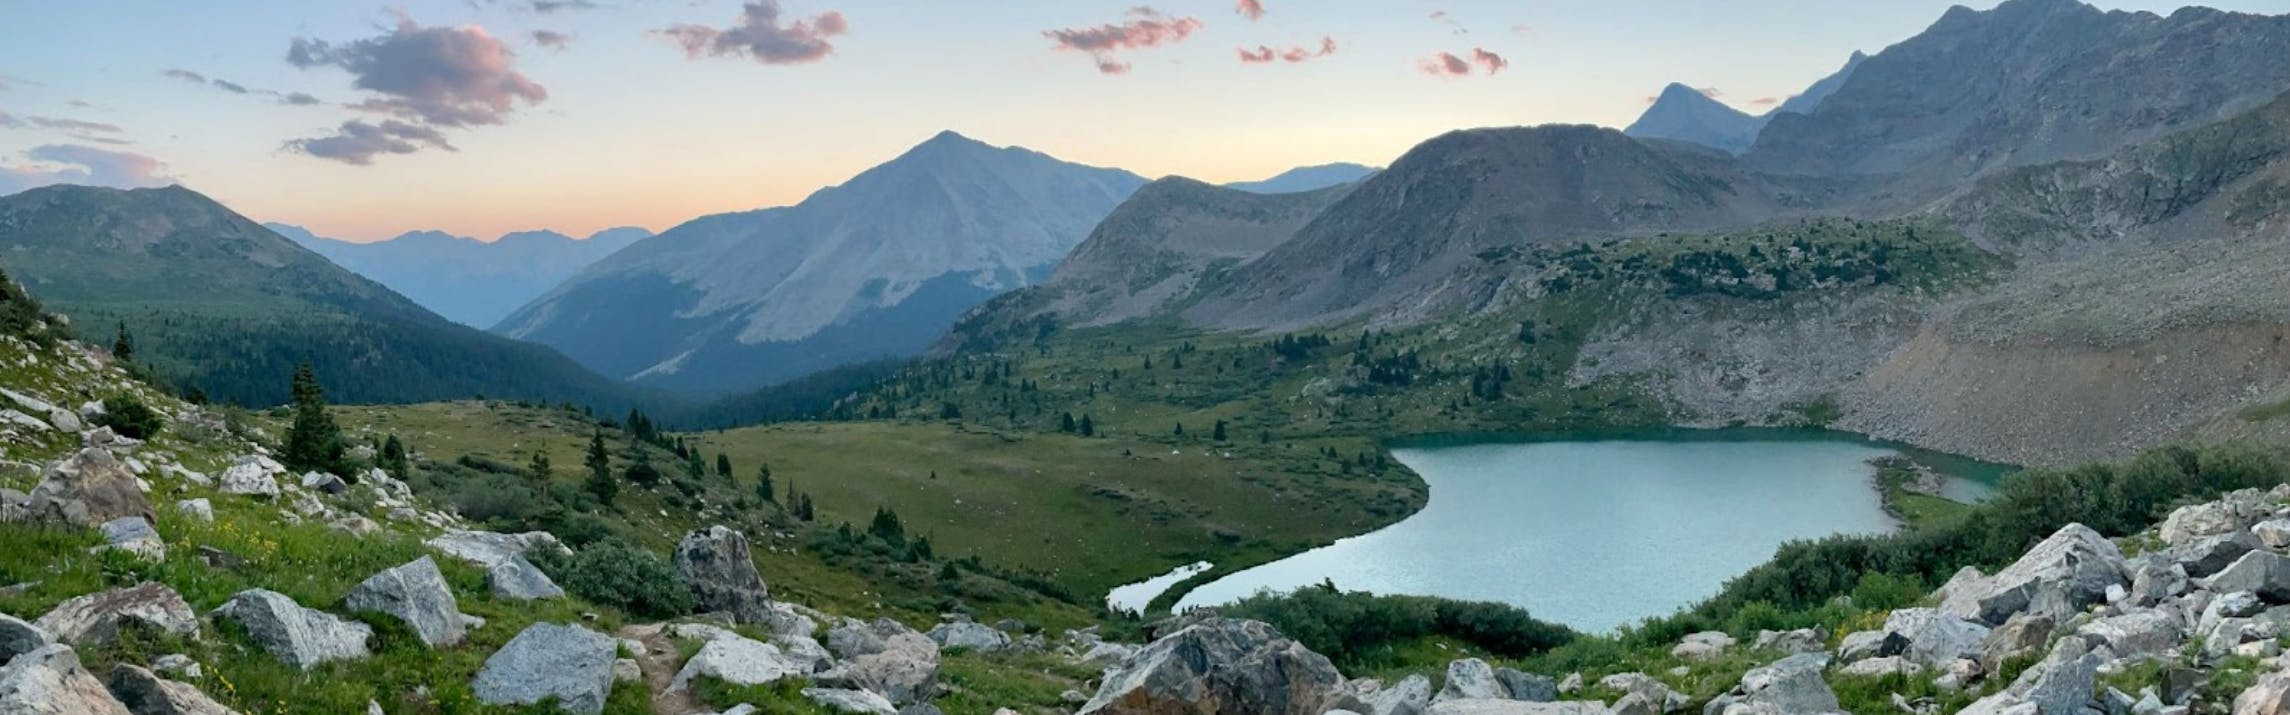 A high alpine lake with mountains, trees, and boulders. There is a sunset happening in the background.